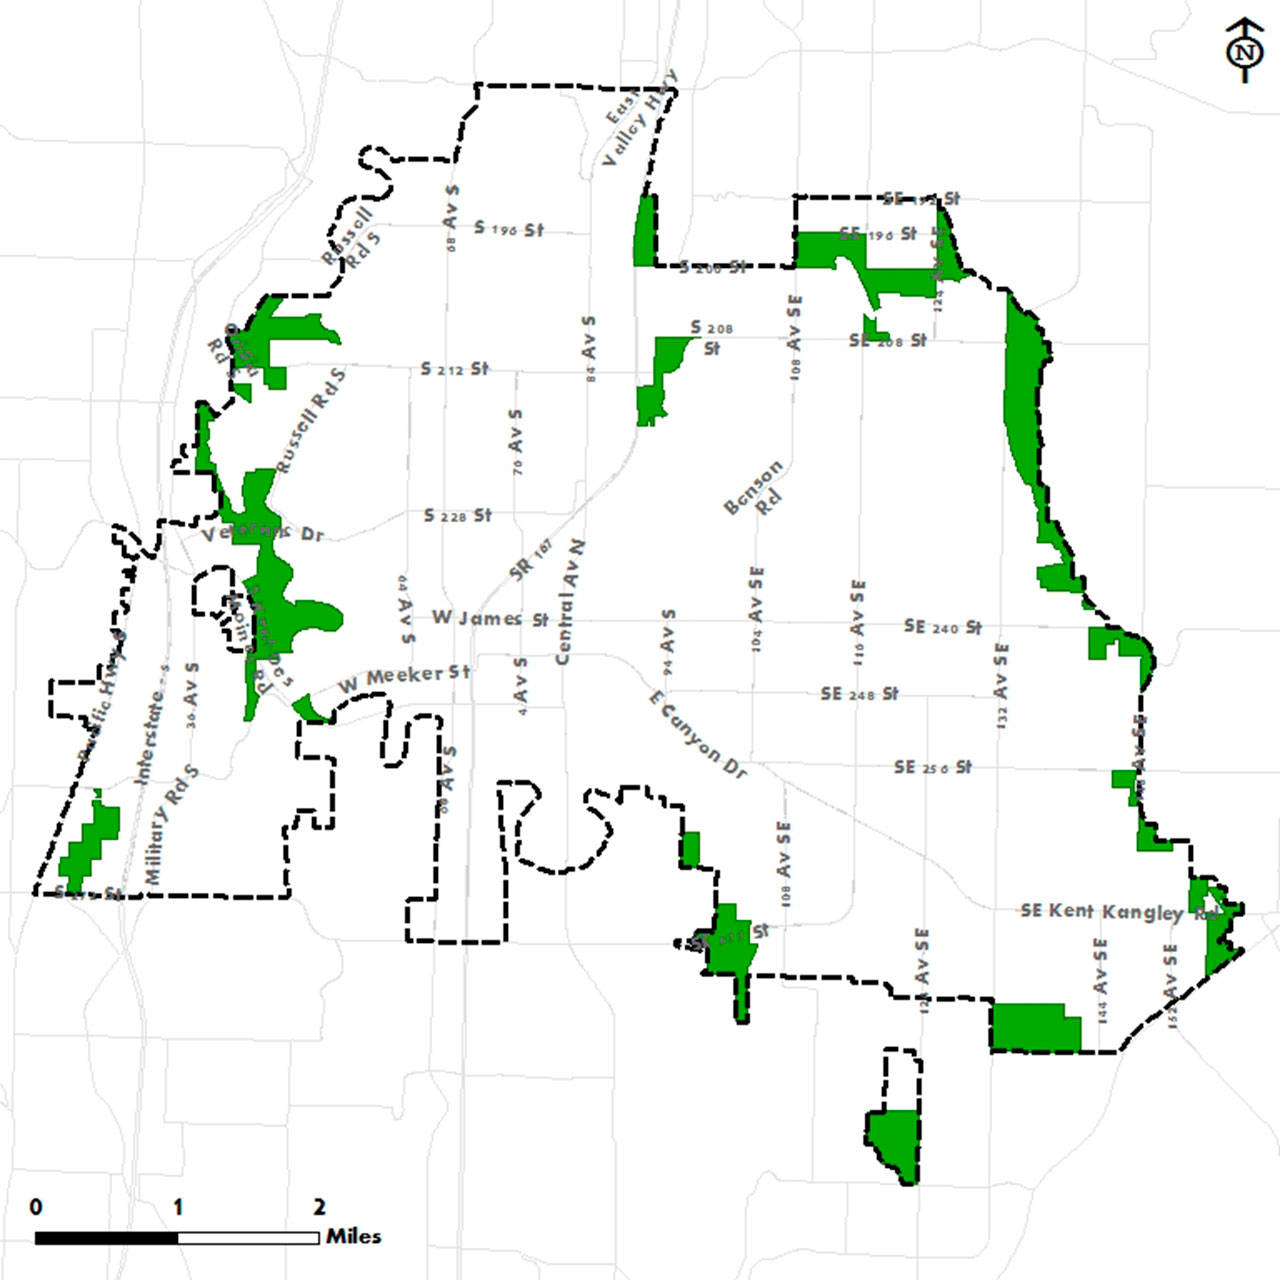 Zoning rules in urban separators allow one single-family home per acre. Kent’s urban separators are shown in green on the map. COURTESY GRAPHIC, City of Kent